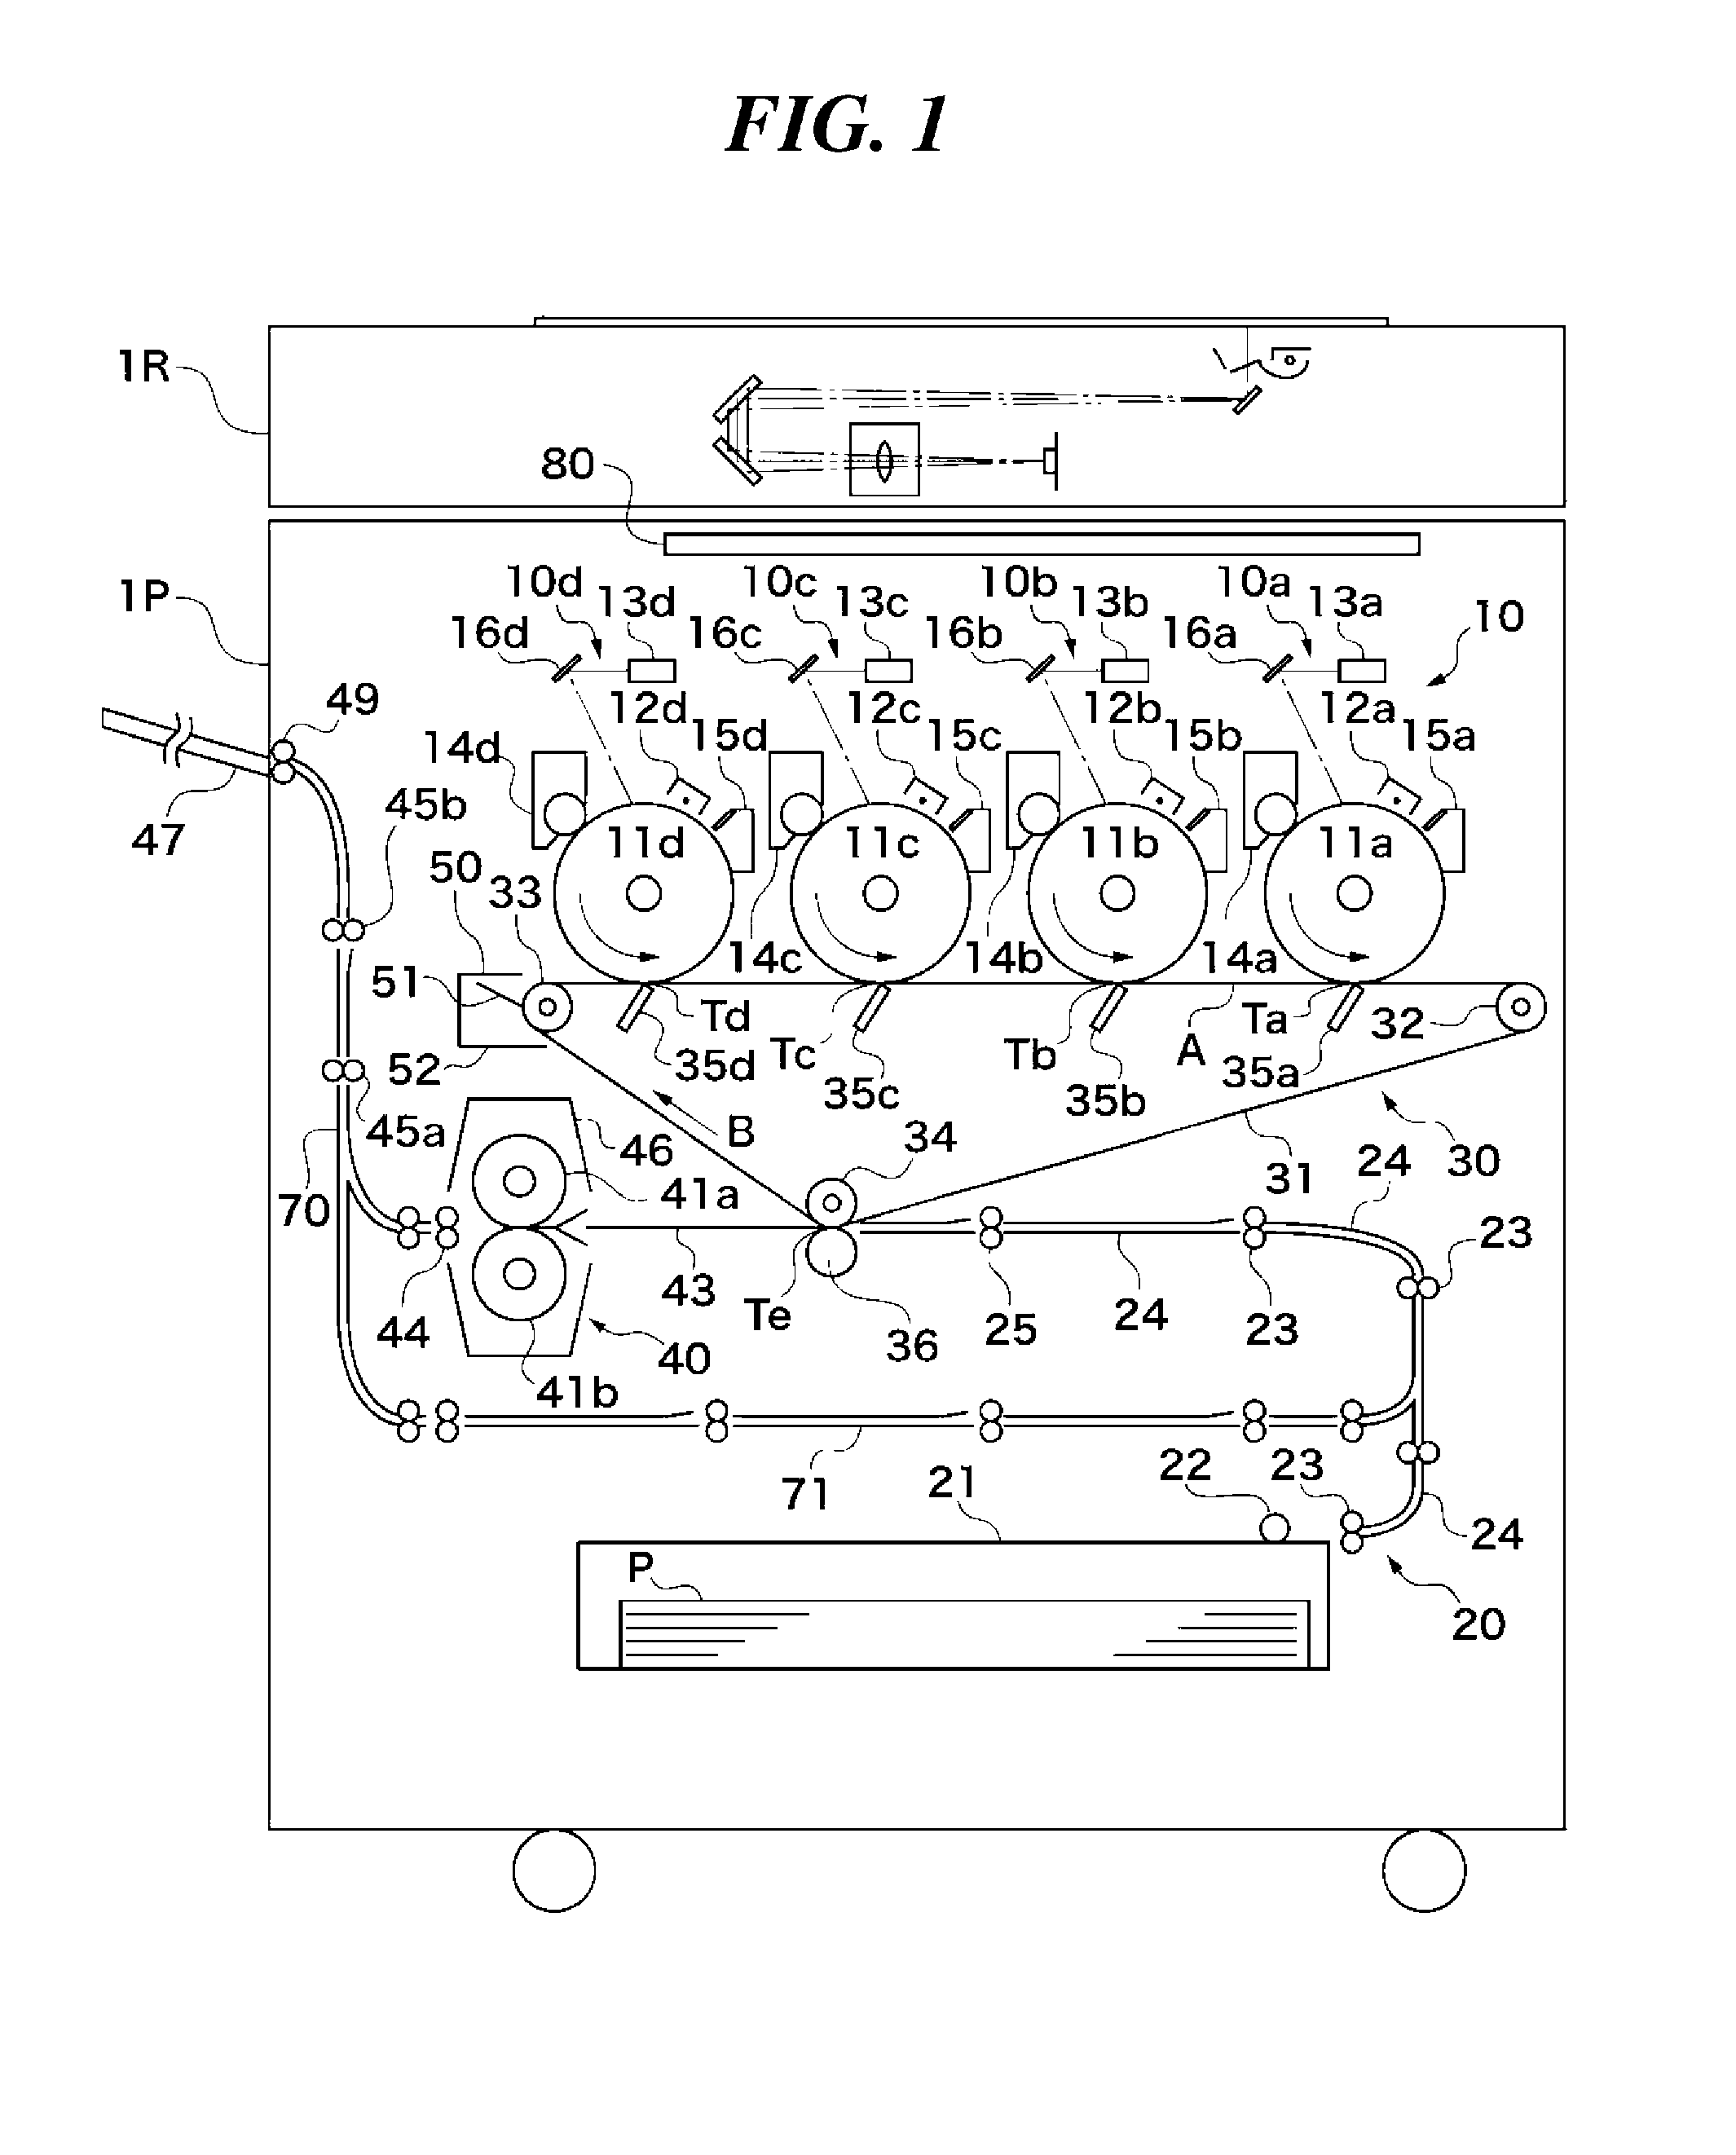 Rotary driving apparatus, control method therefor, storage medium storing control program therefor, and image forming apparatus